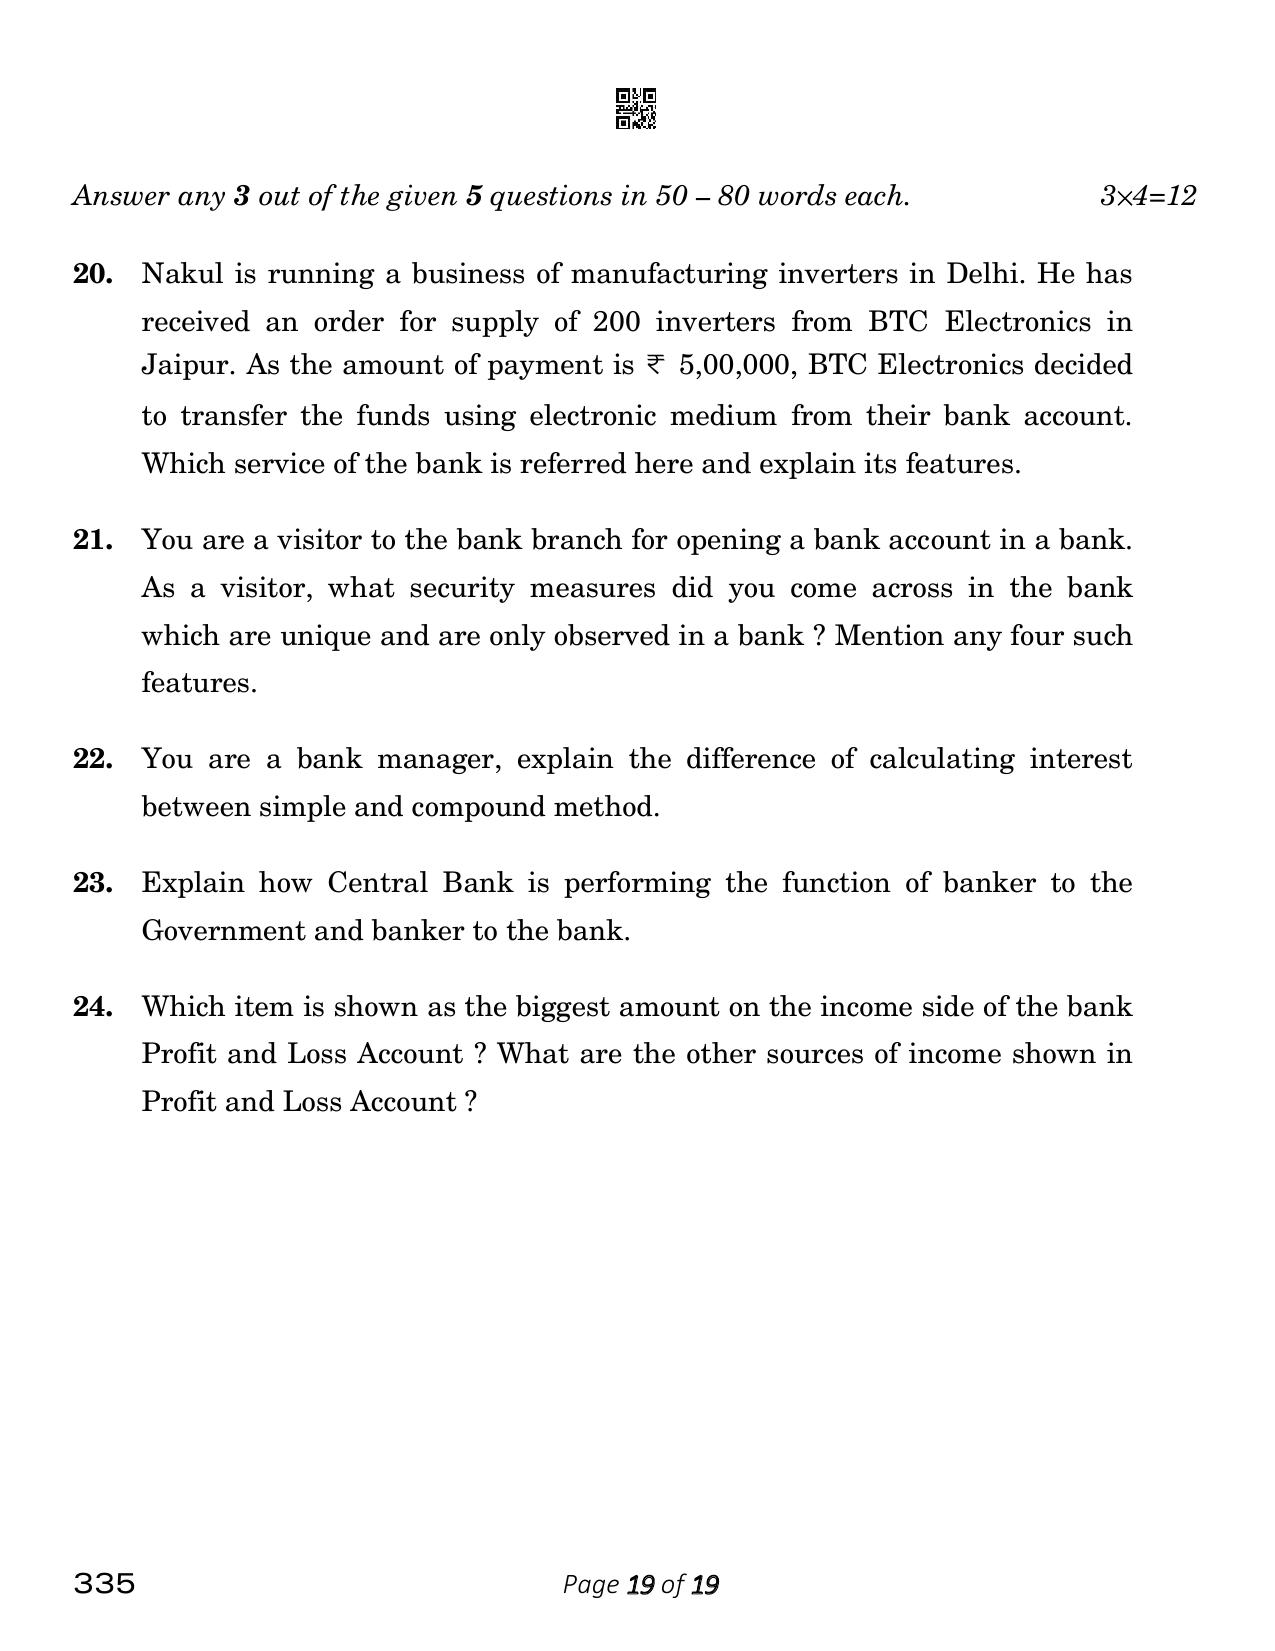 CBSE Class 12 Banking (Compartment) 2023 Question Paper - Page 19